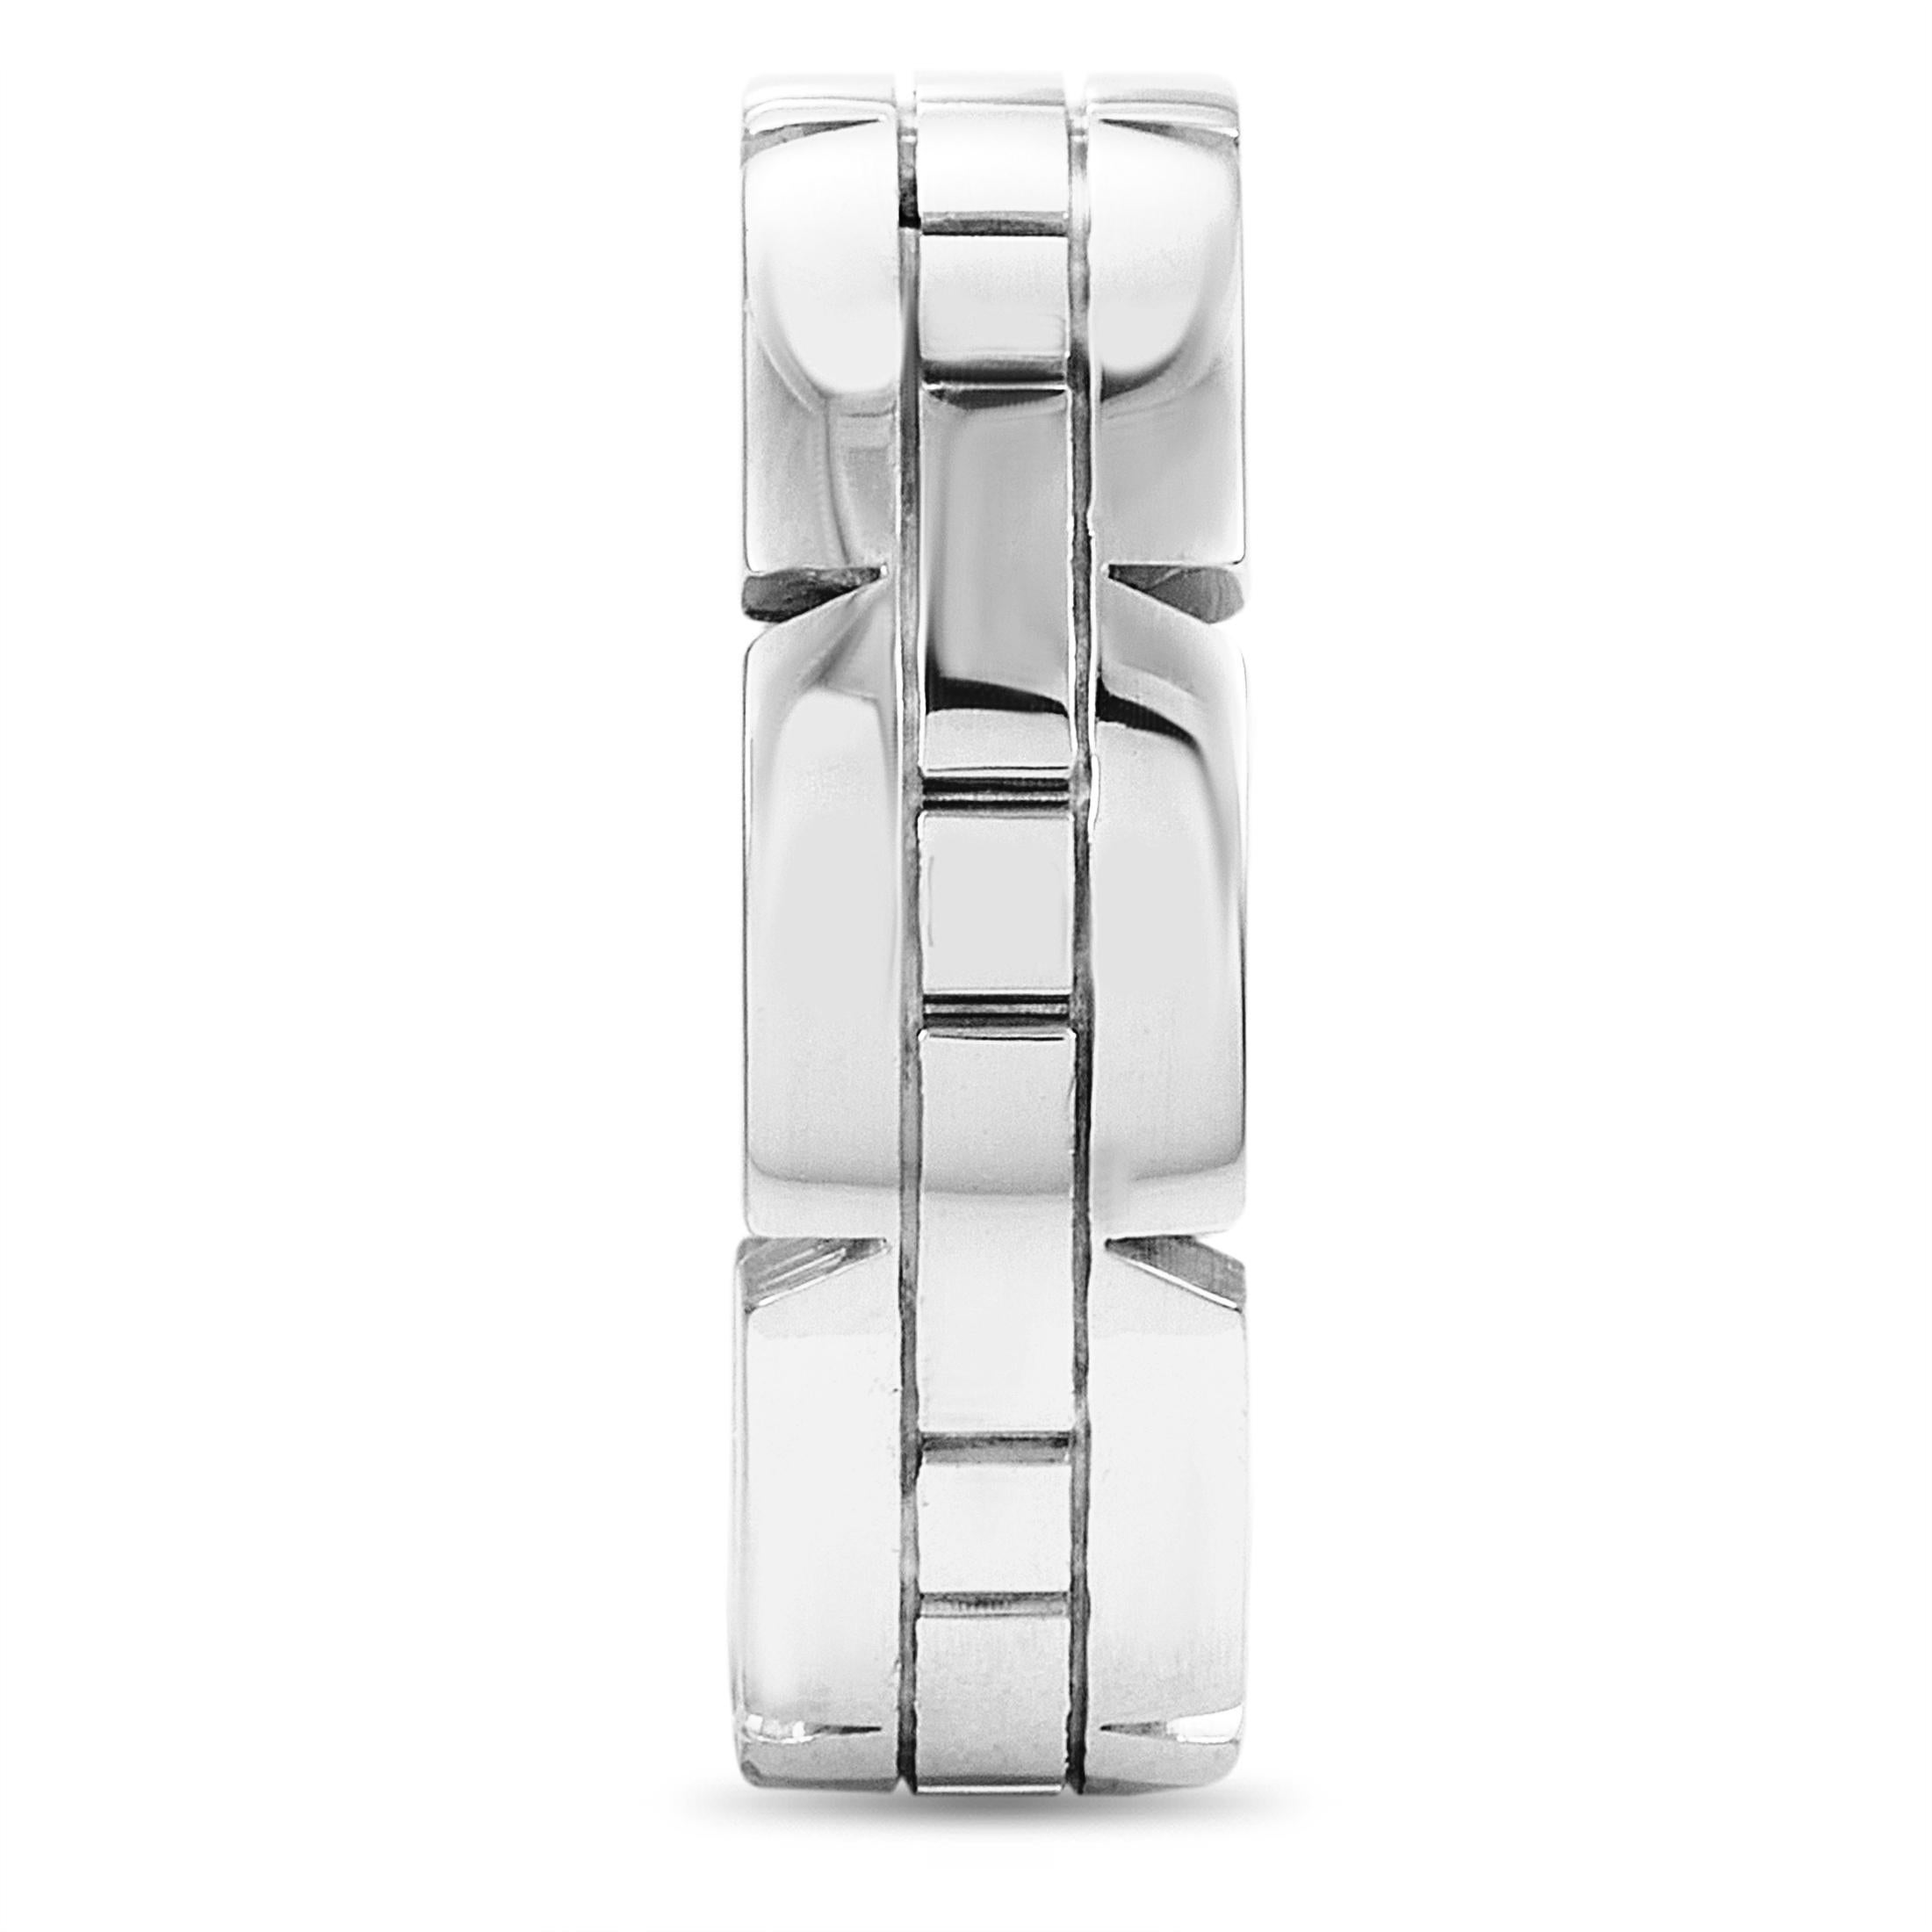 The Cartier “Tank Française” ring is made of 18K white gold and weighs 9.5 grams. The ring boasts band thickness of 6 mm and top height of 1.5 mm, while top dimensions measure 21 by 6 mm.

This item is offered in estate condition and includes the